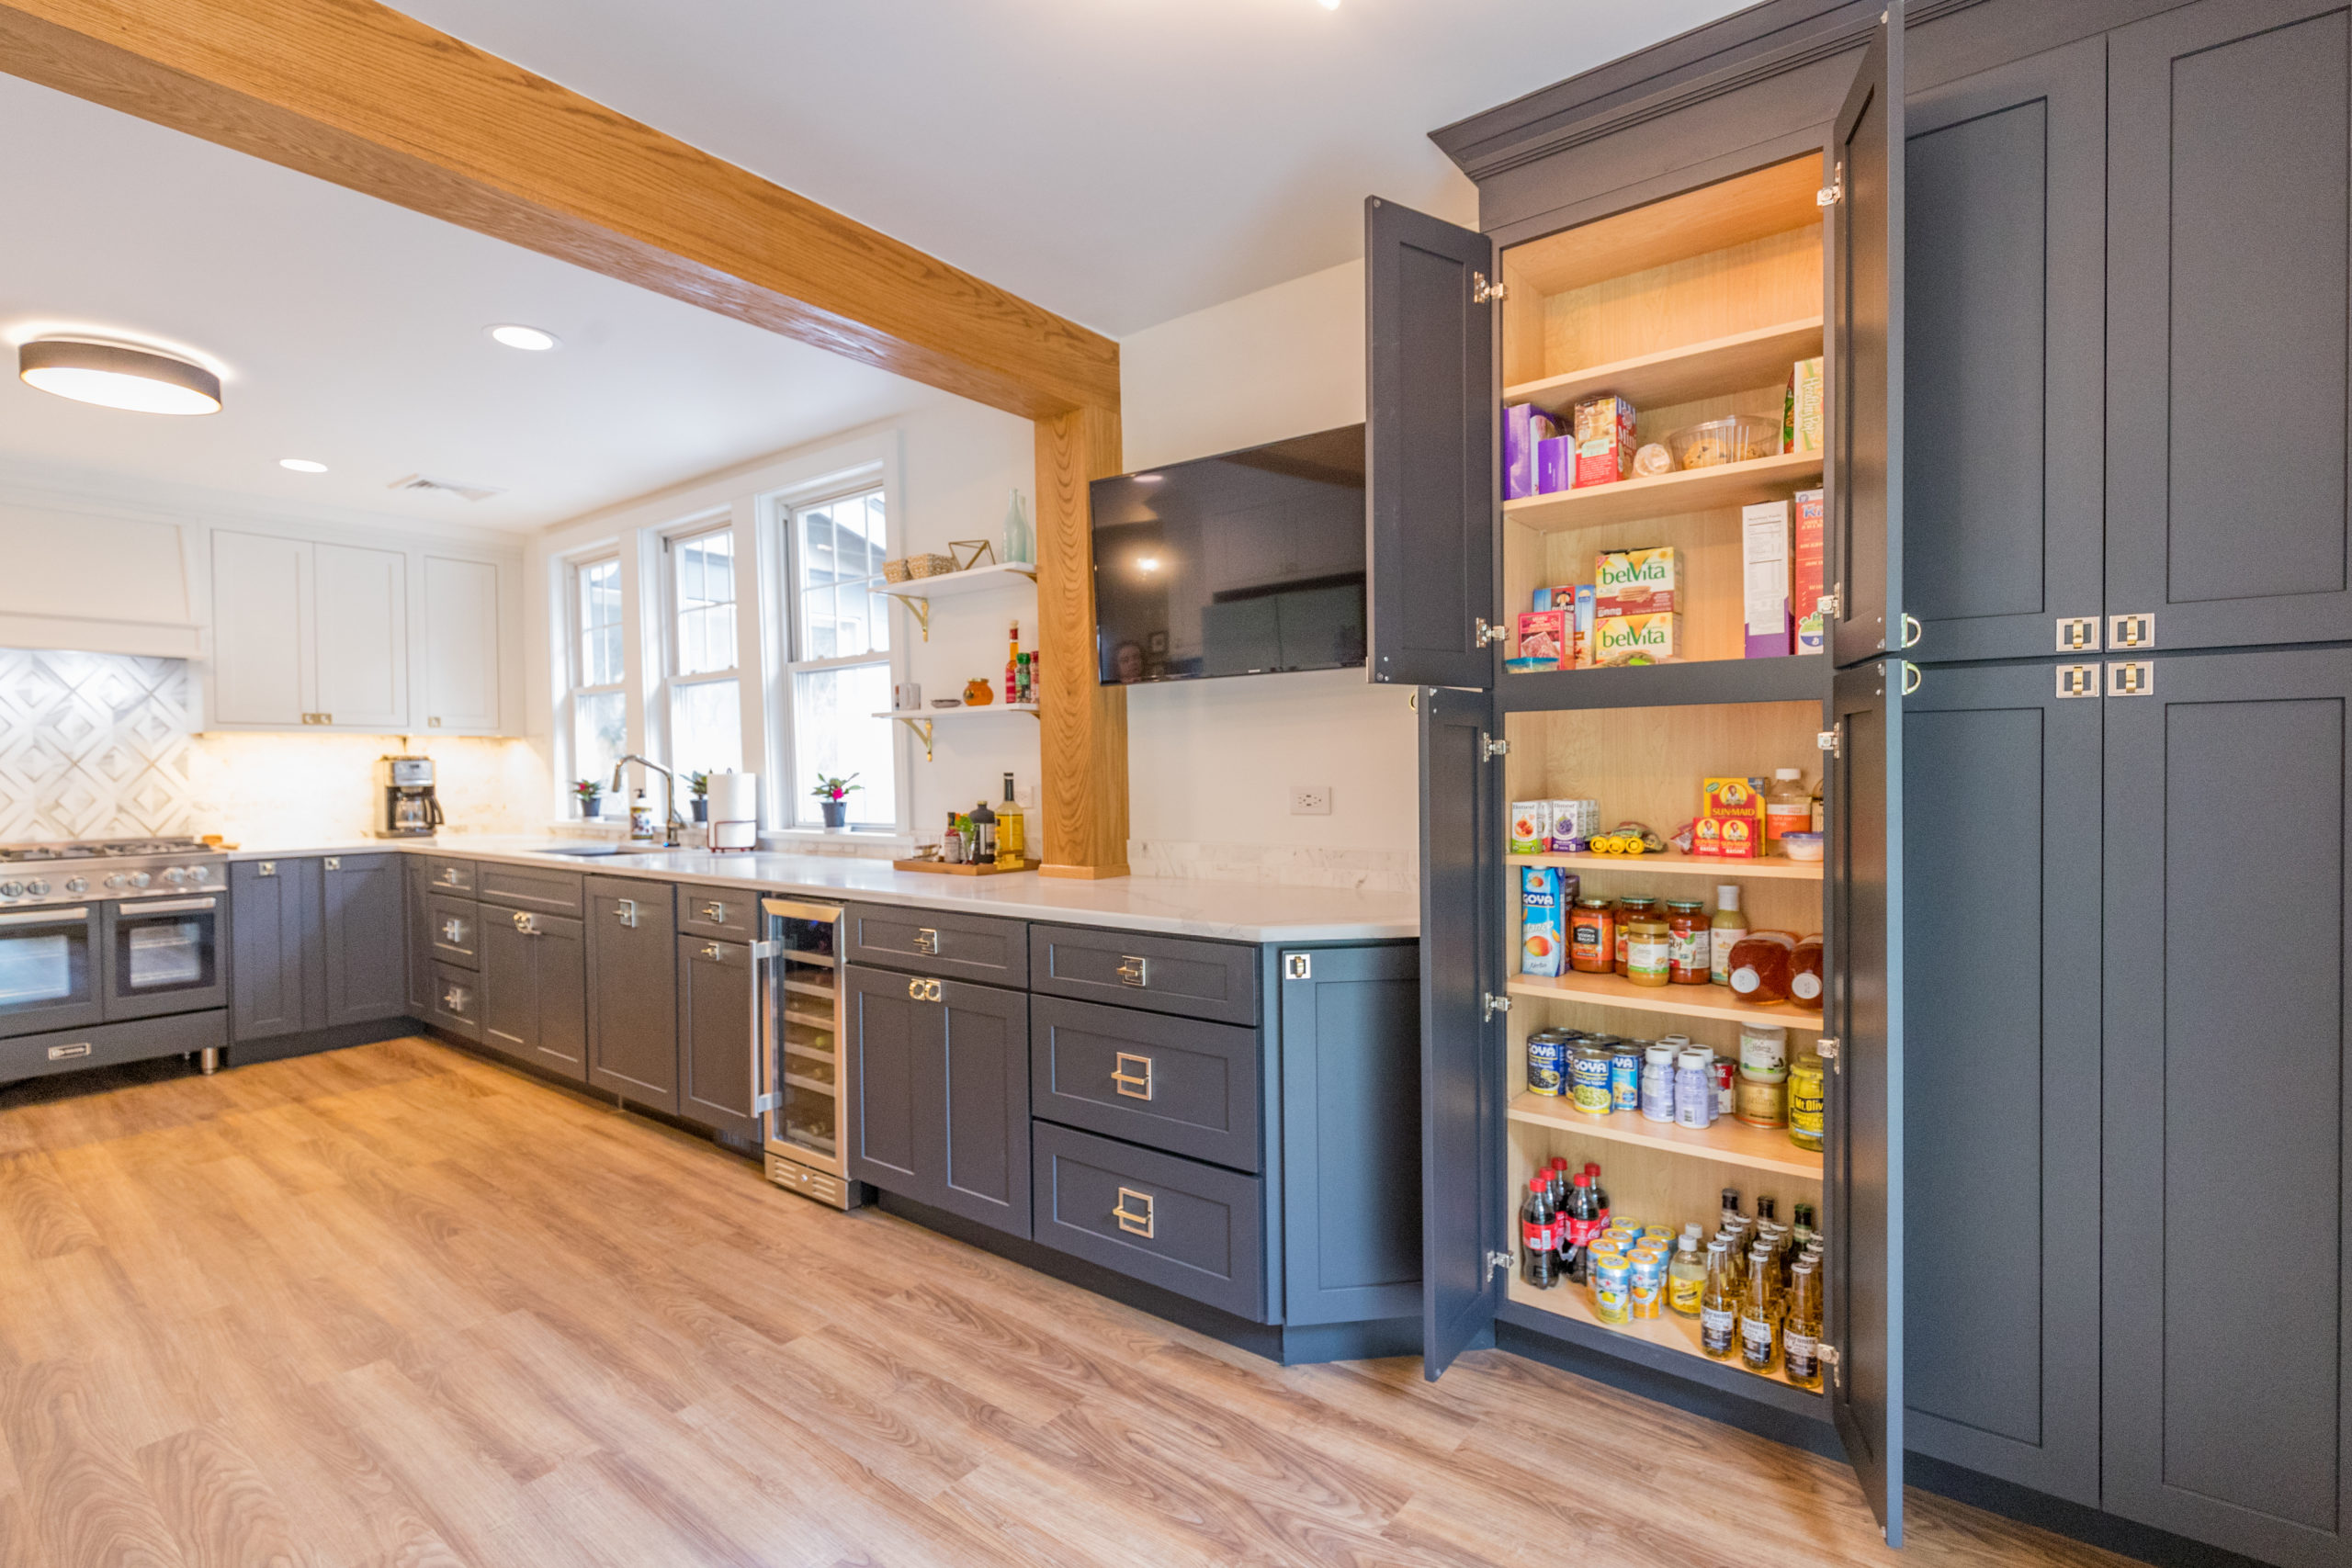 Image of a renovated kitchen with open pantry